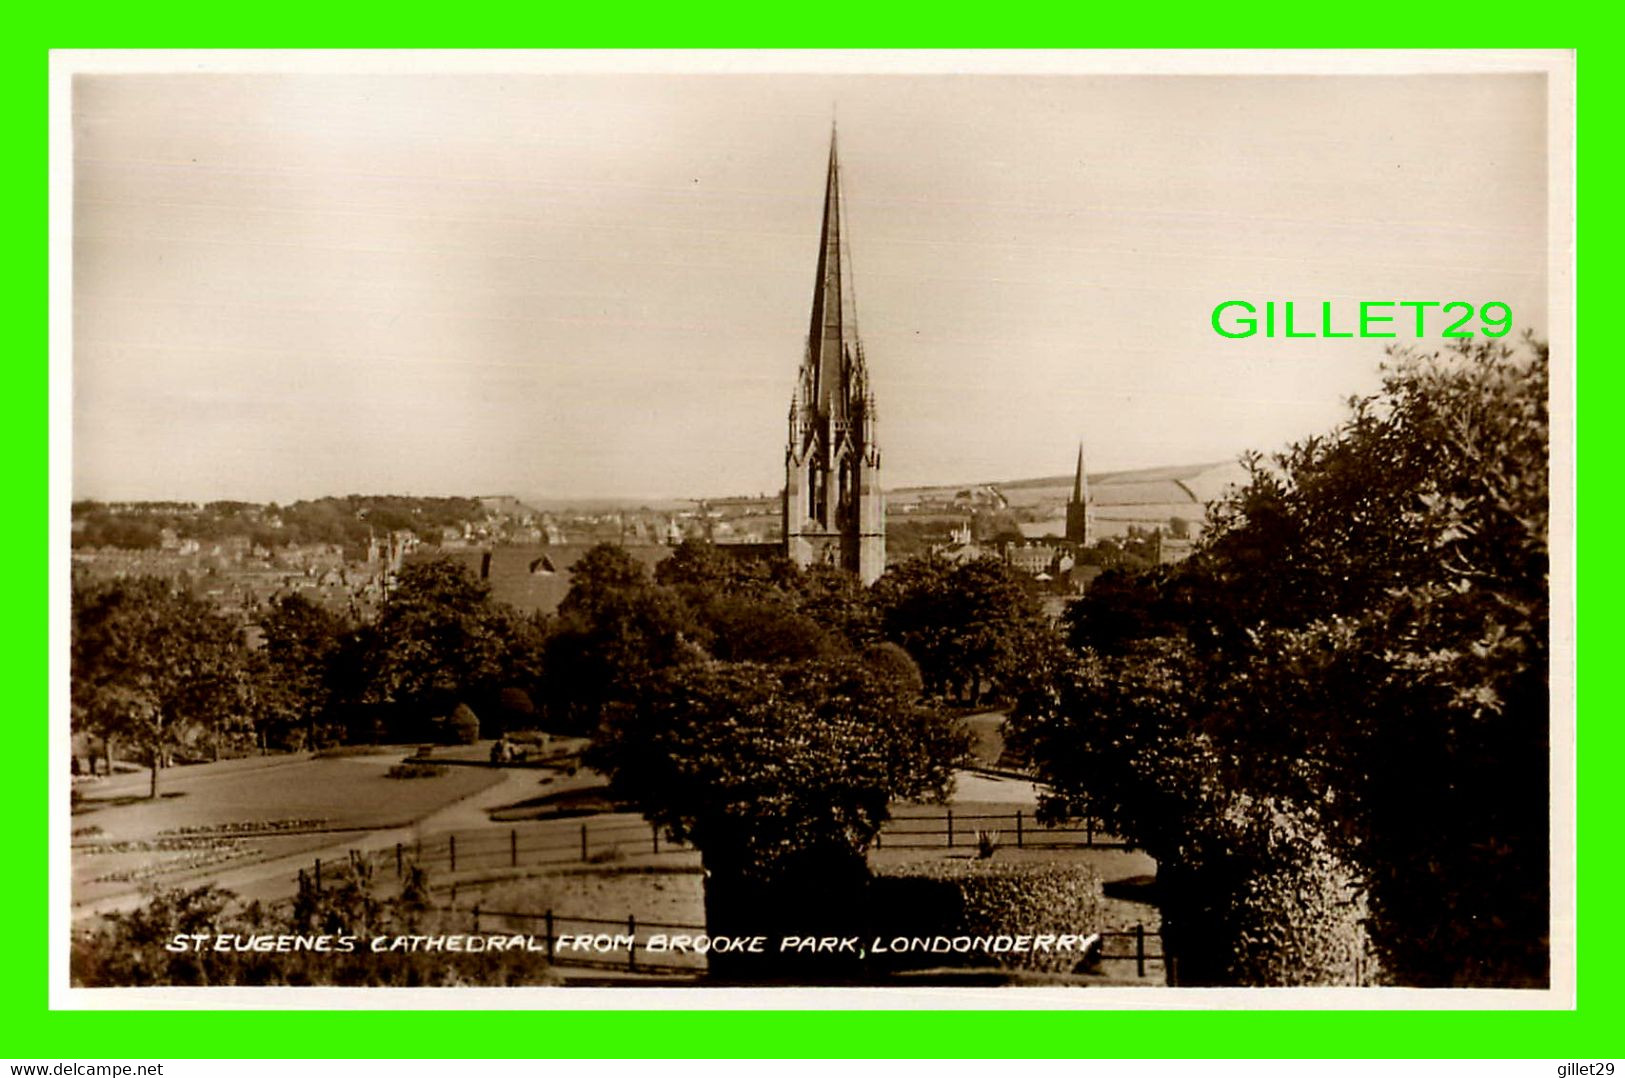 LONDONBERRY, IRLANDE DU NORD - ST EUGENE'S CATHEDRAL FROM BROOKE PARK - VALENTINE & SONS LTD - REAL PHOTO - - Londonderry